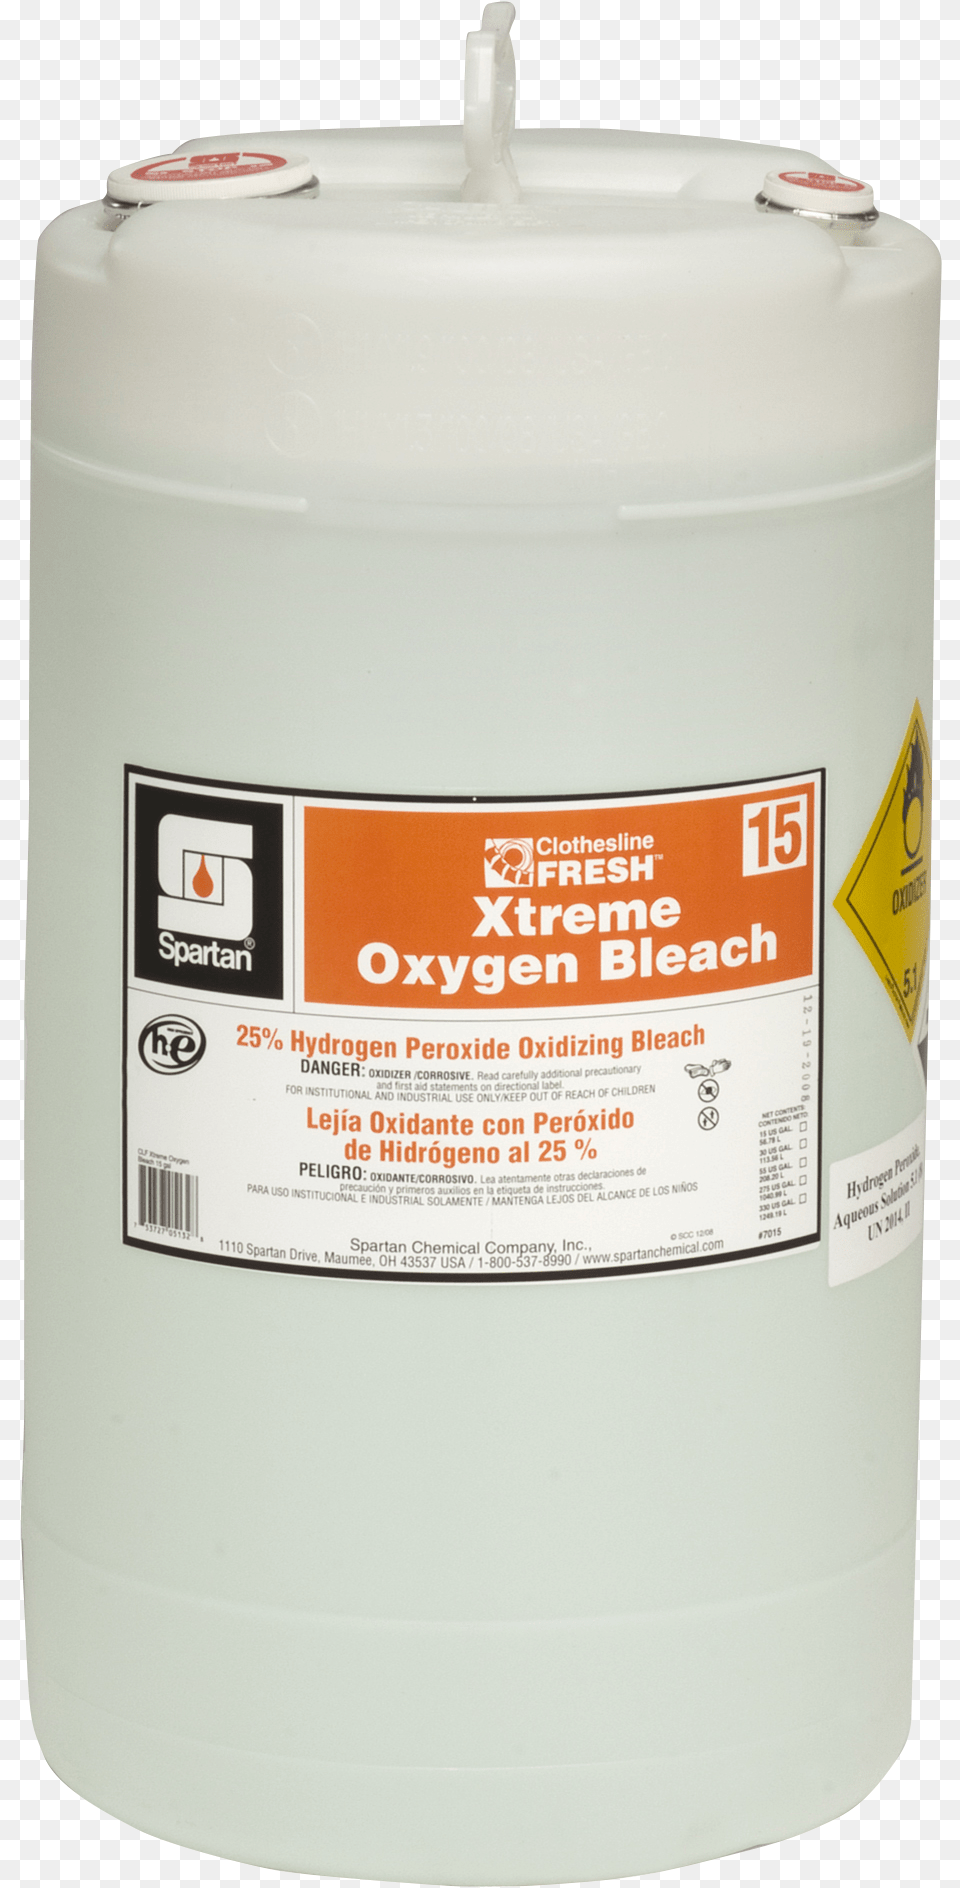 Clf Xtreme Oxygen Bleach Cylinder, Can, Tin Free Png Download